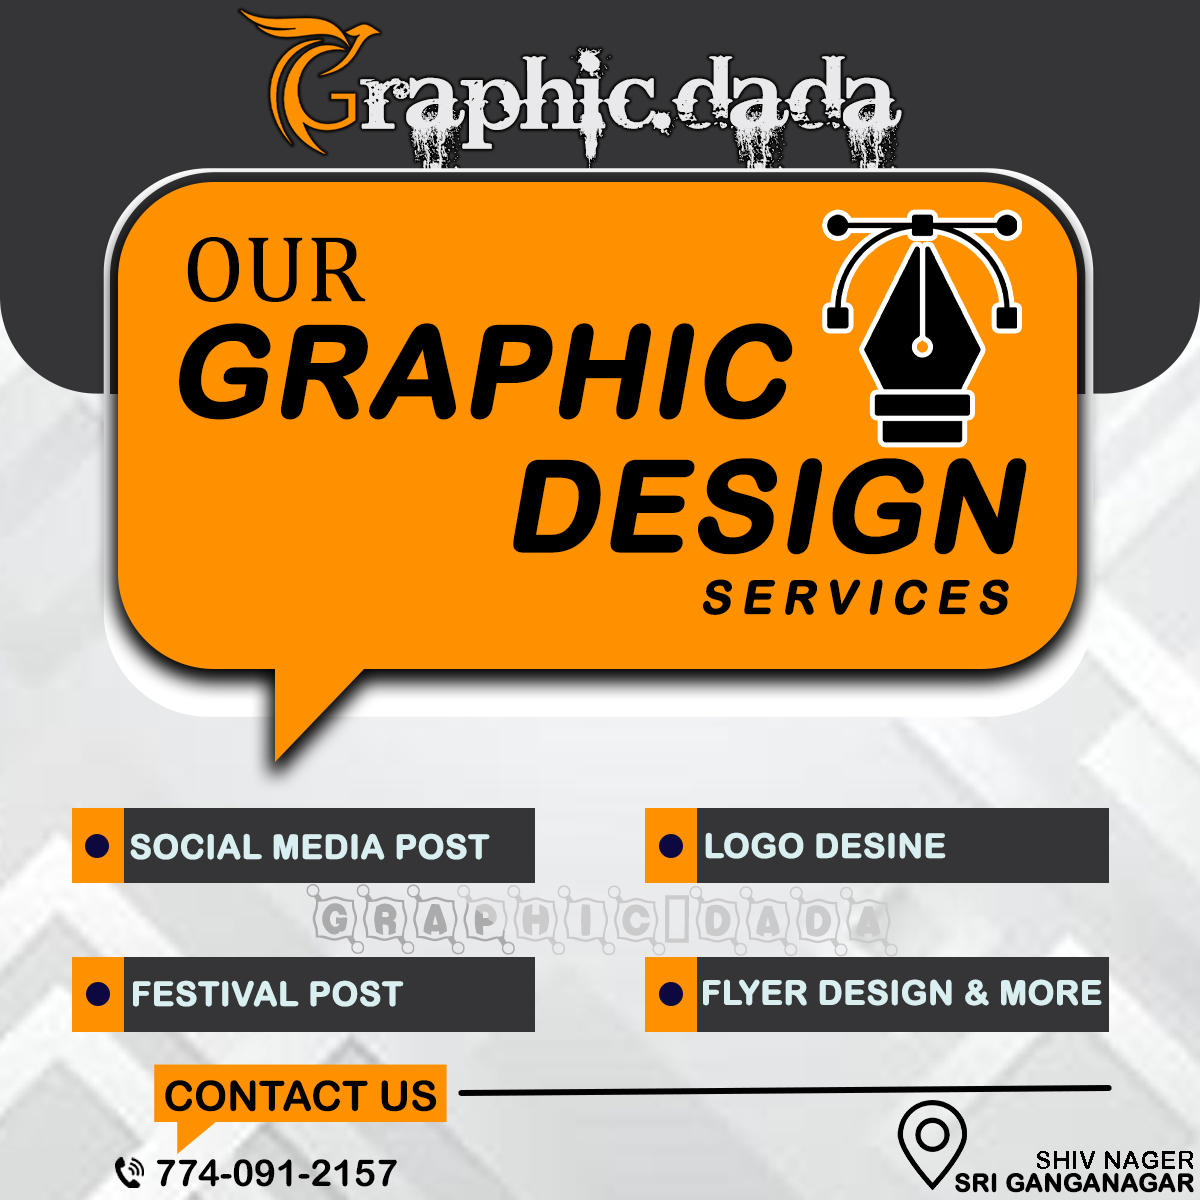 graphic dada Professional Services | IT Services